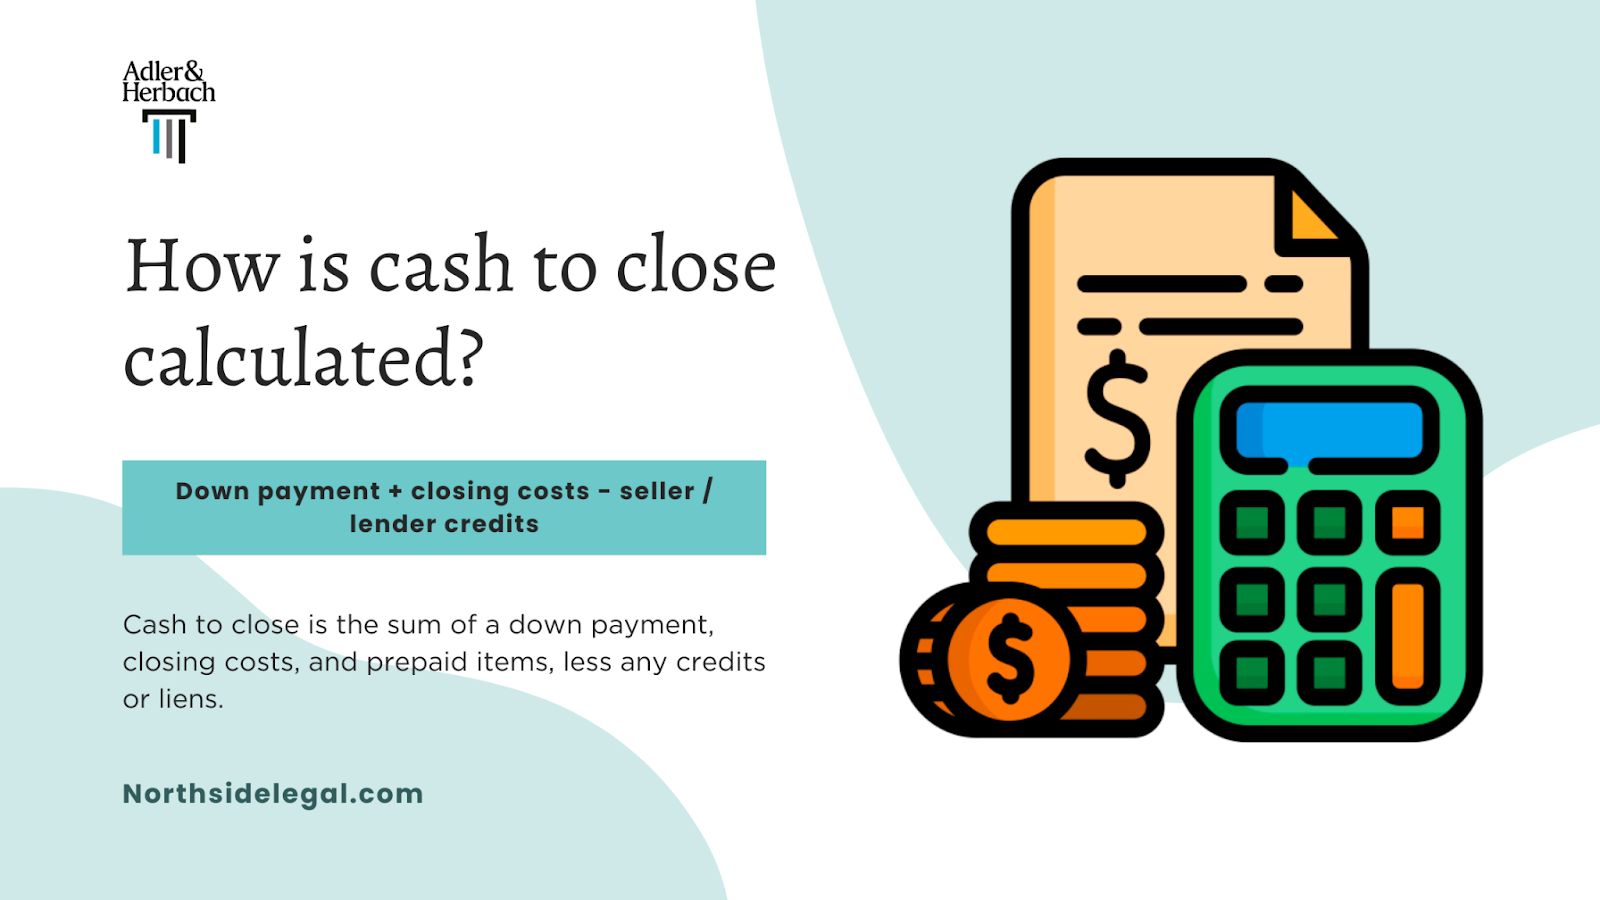 How is cash to close calculated?